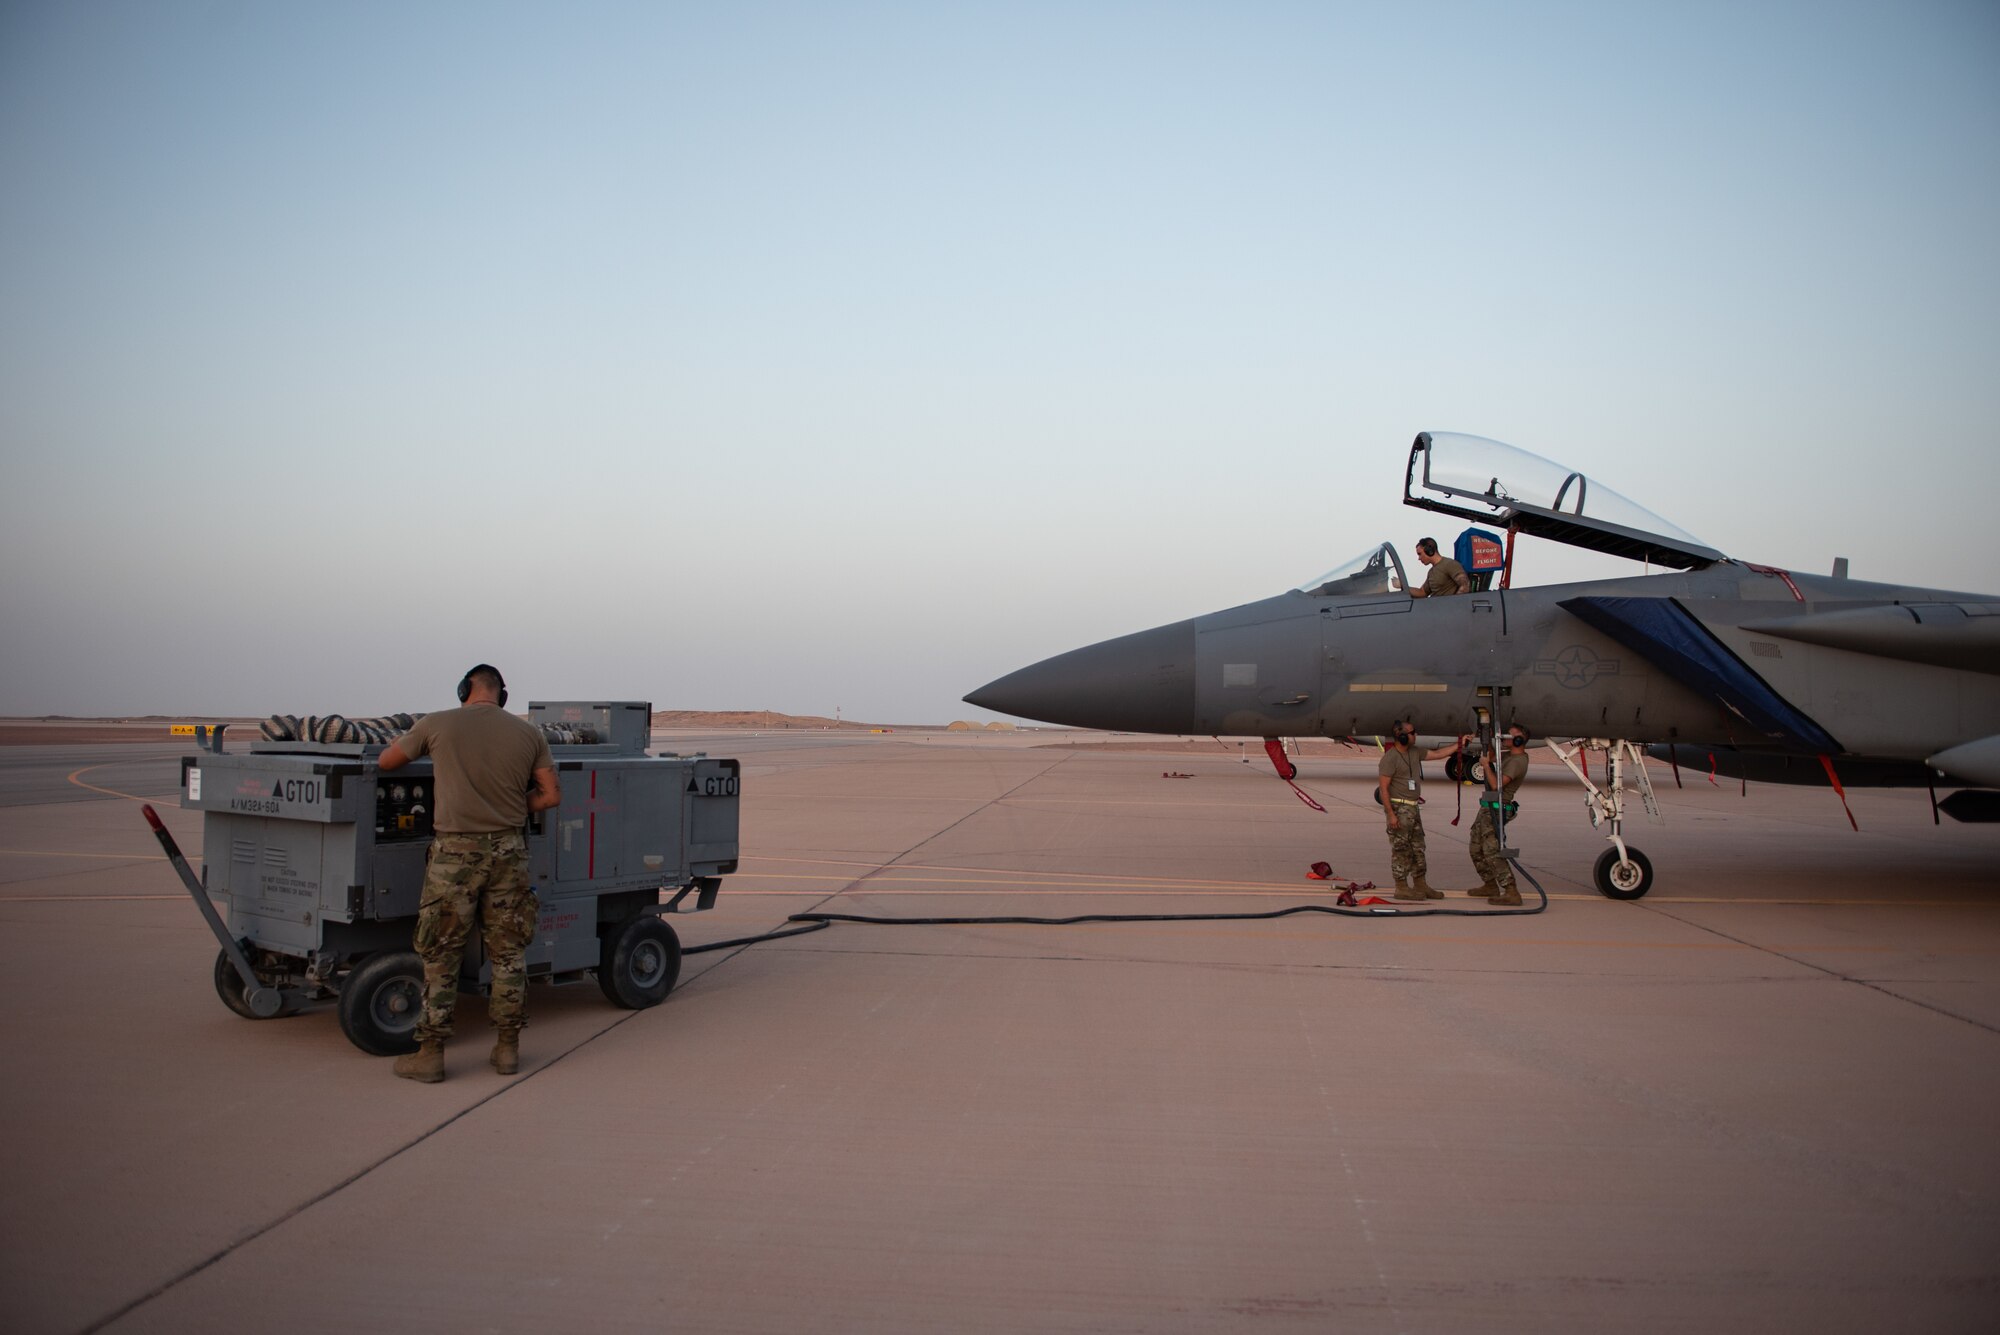 380th Expeditionary Aircraft Maintenance Squadron crew chiefs, power an F-15C Eagle during exercise Hype Eagle Aug. 18, 2019, at Prince Sultan Air Base, Saudi Arabia. The 159th Expeditionary Fighter Squadron forward deployed to challenge their flexibility at expanding tactical and strategical reach while strengthening coalition and regional partnerships in the U.S. Central Command area of responsibility. (U.S. Air Force photo by Staff Sgt. Chris Thornbury)